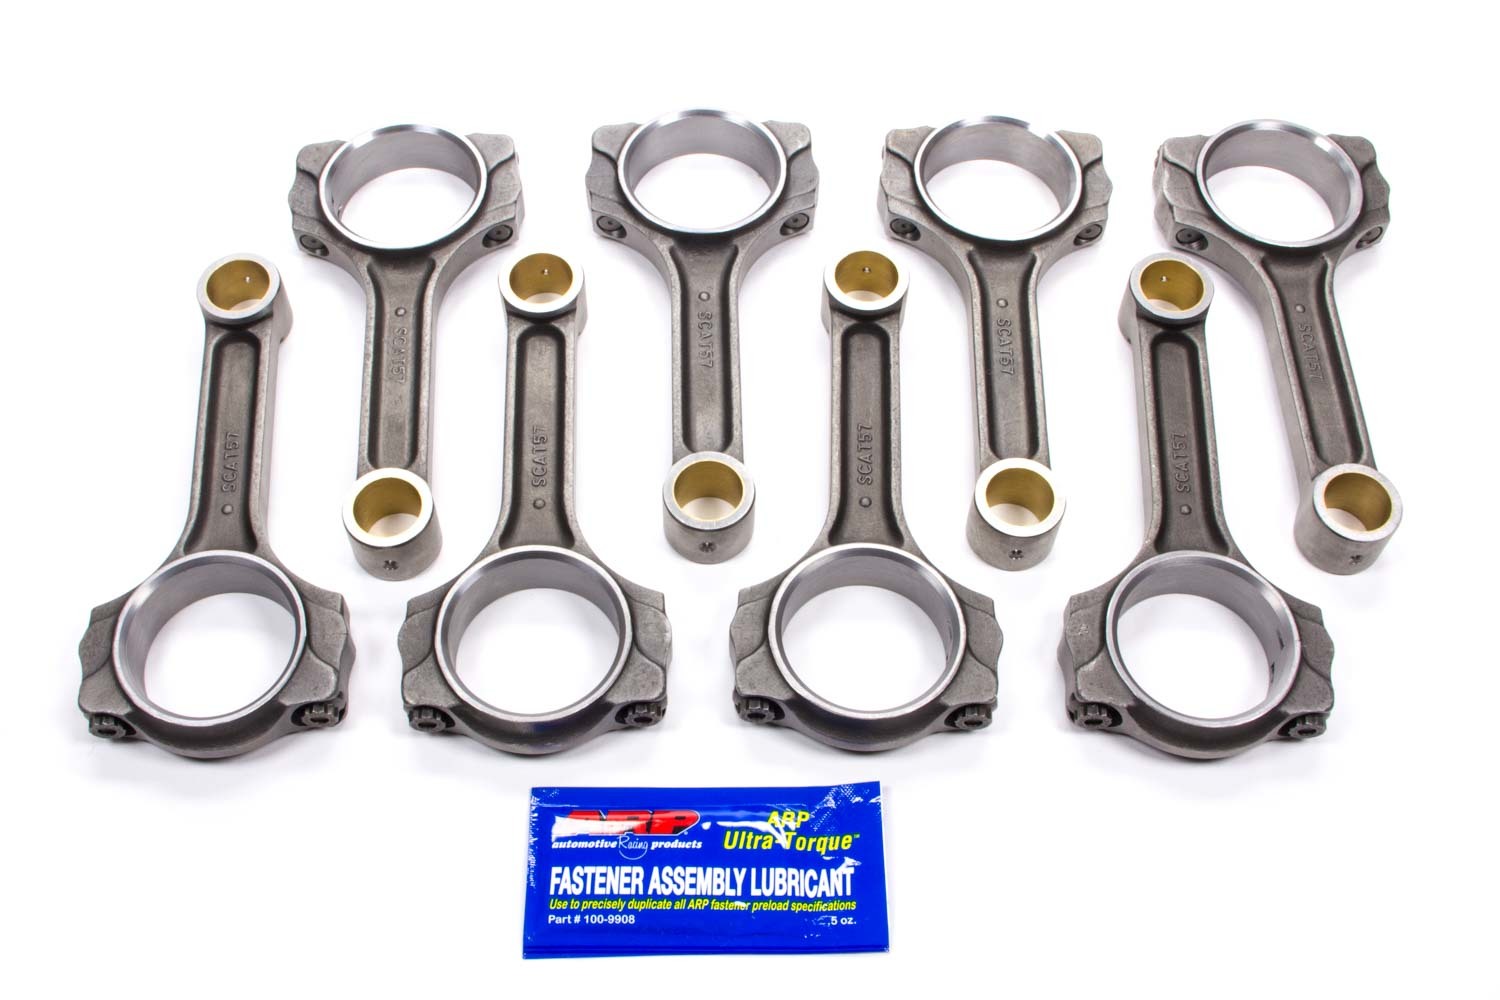 Scat 2-ICR6000-7/16 - Connecting Rod, Pro Comp, I Beam, 6.000 in Long, Bushed, 7/16 in Cap Screws, ARP8740, Forged Steel, Small Block Chevy, Set of 8